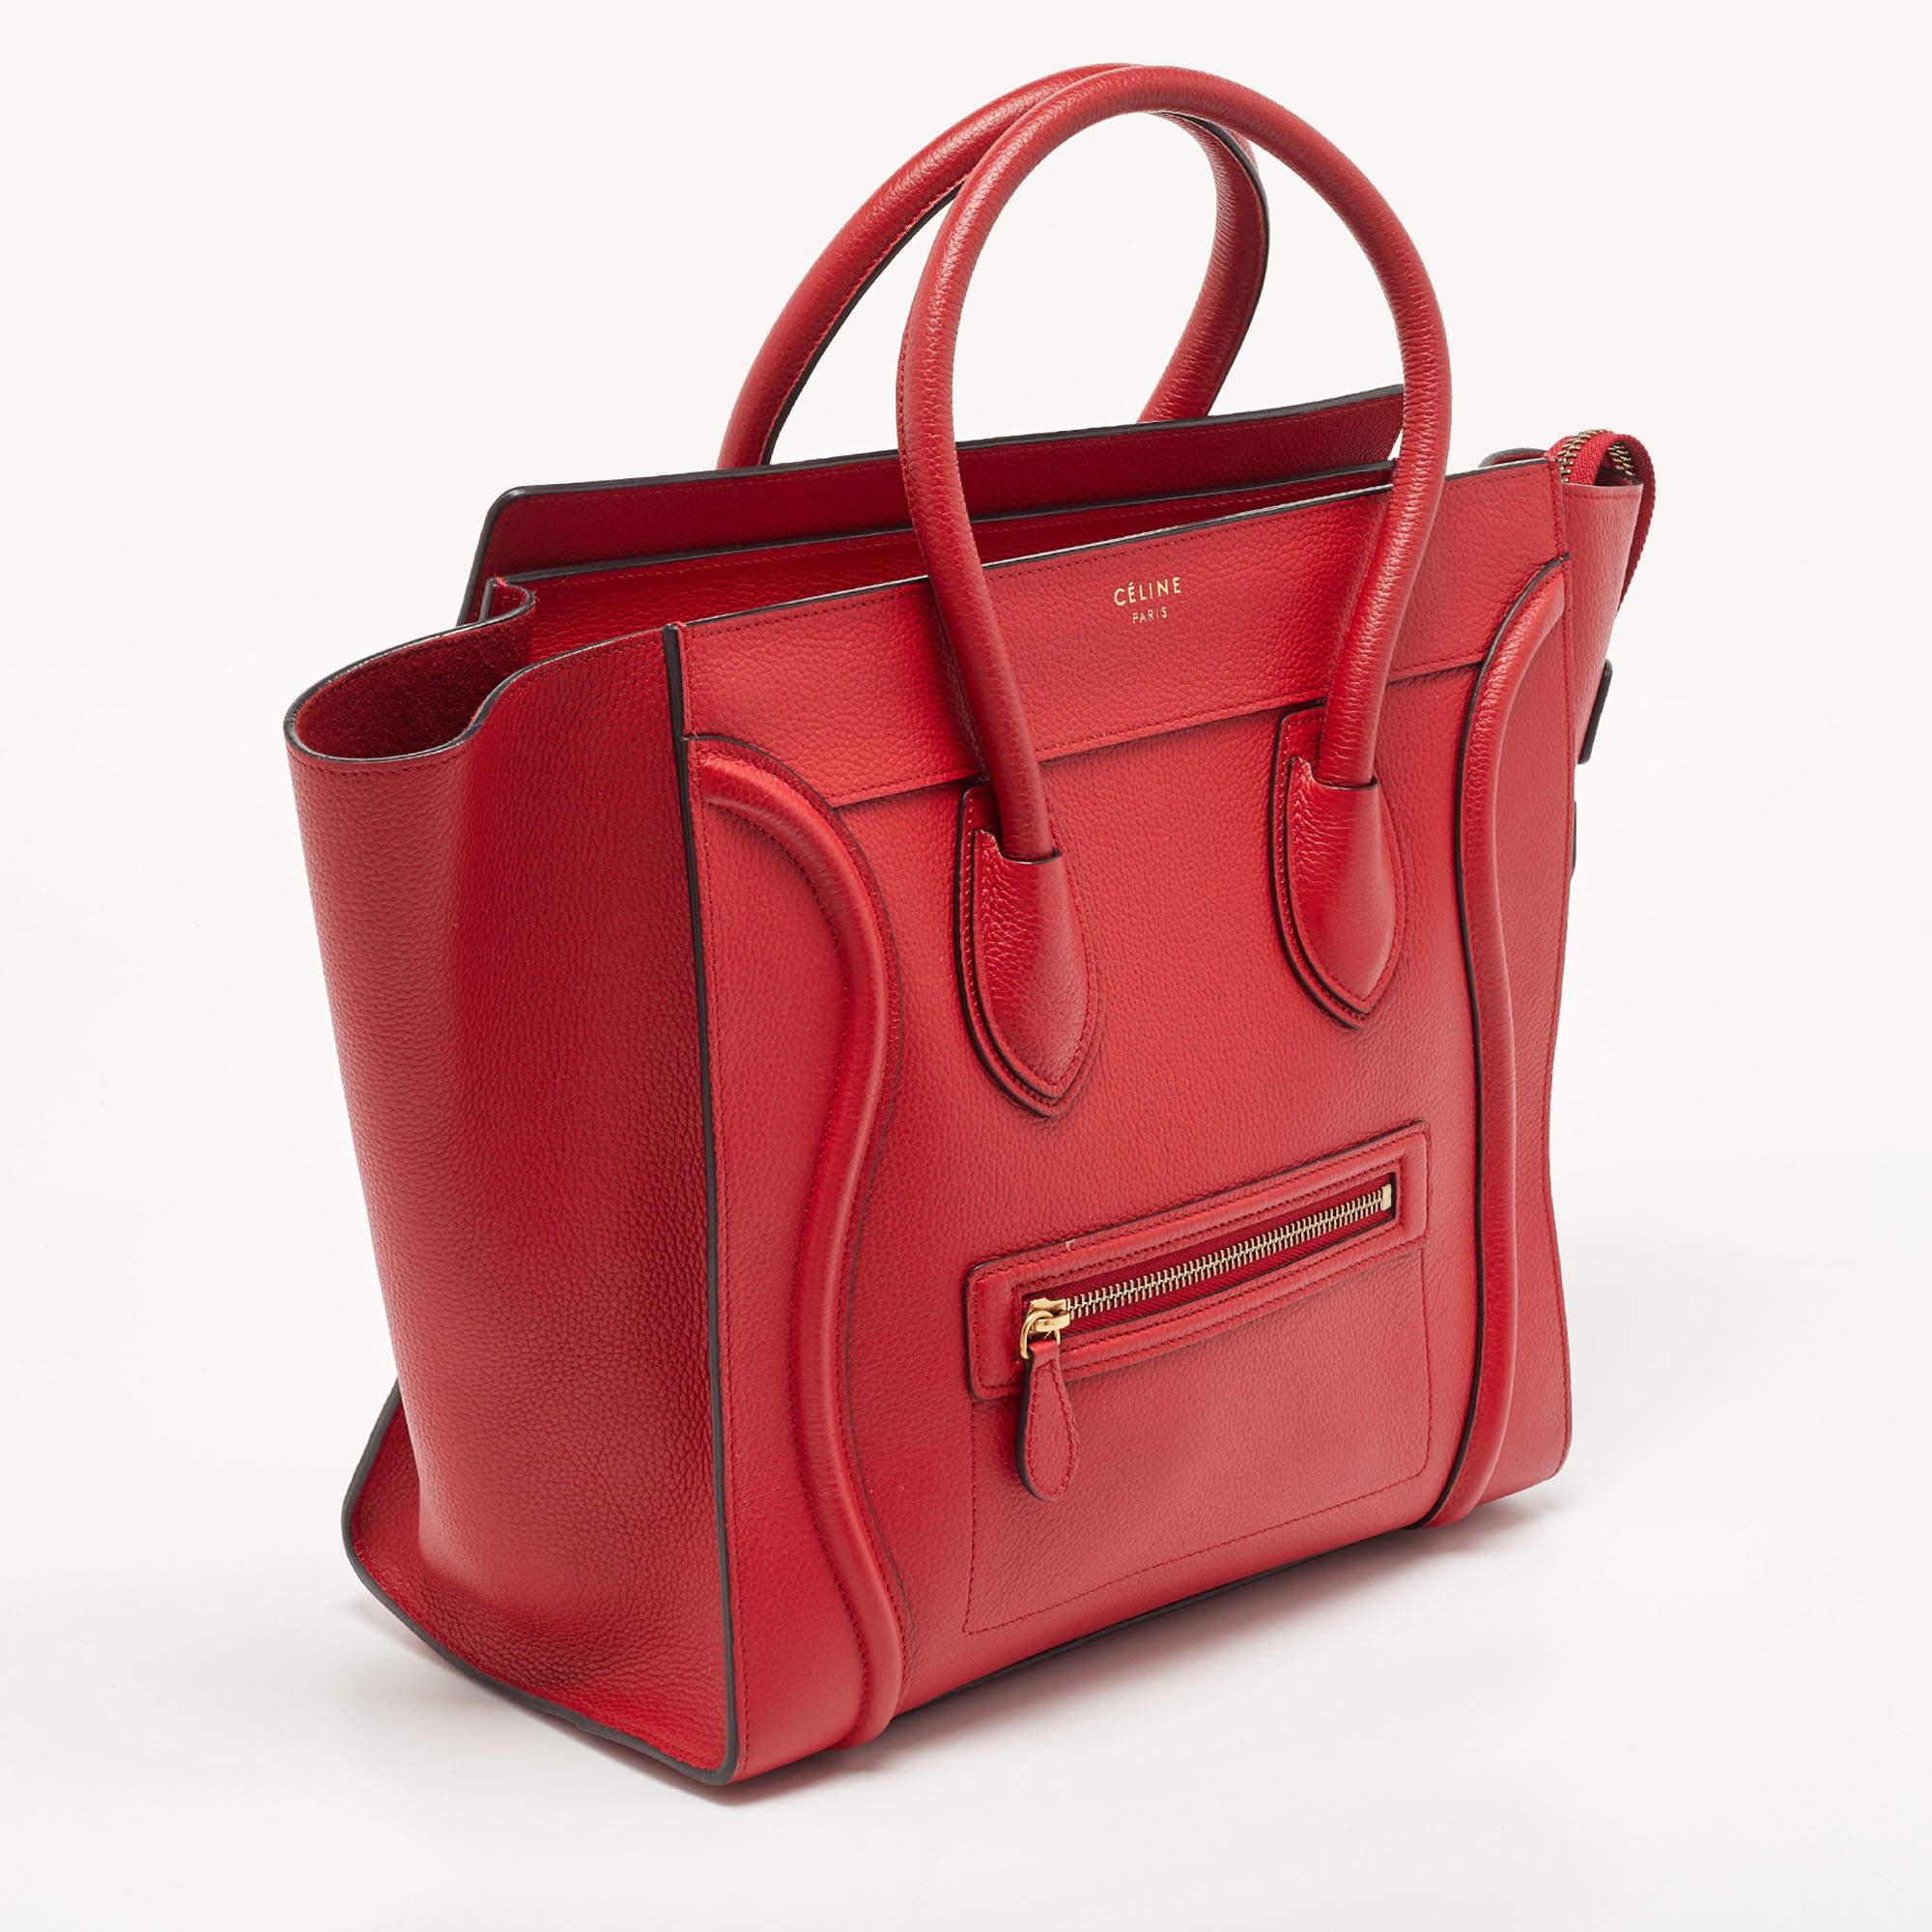 Women's Celine Red Leather Mini Luggage Tote For Sale